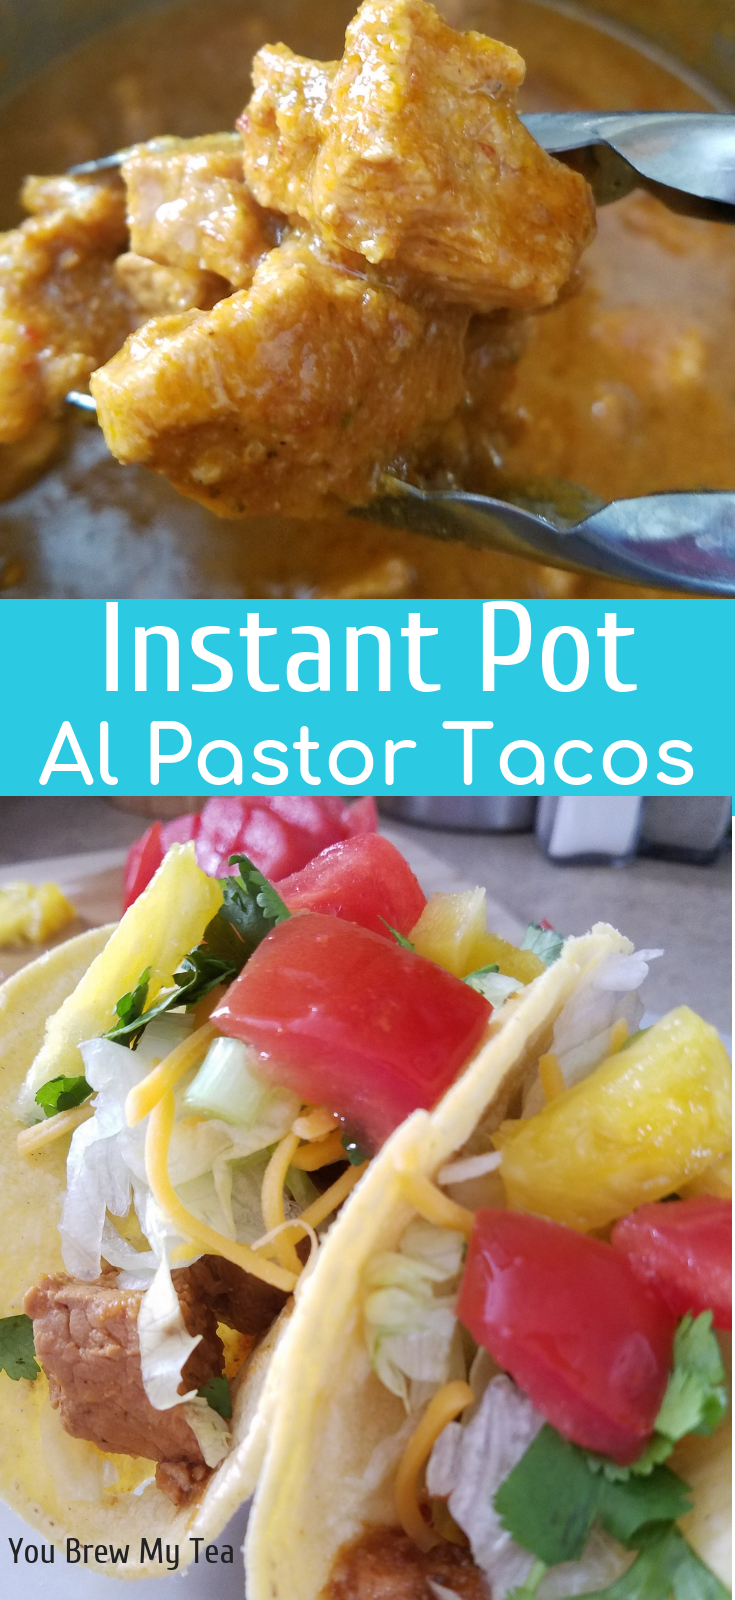 Al Pastor Tacos are a great addition to your menu plan! Instant Pot recipes save tons of time in your weekly meal plan! Make our easy Instant Pot Al Pastor as a perfect pork recipe for your menu this week!